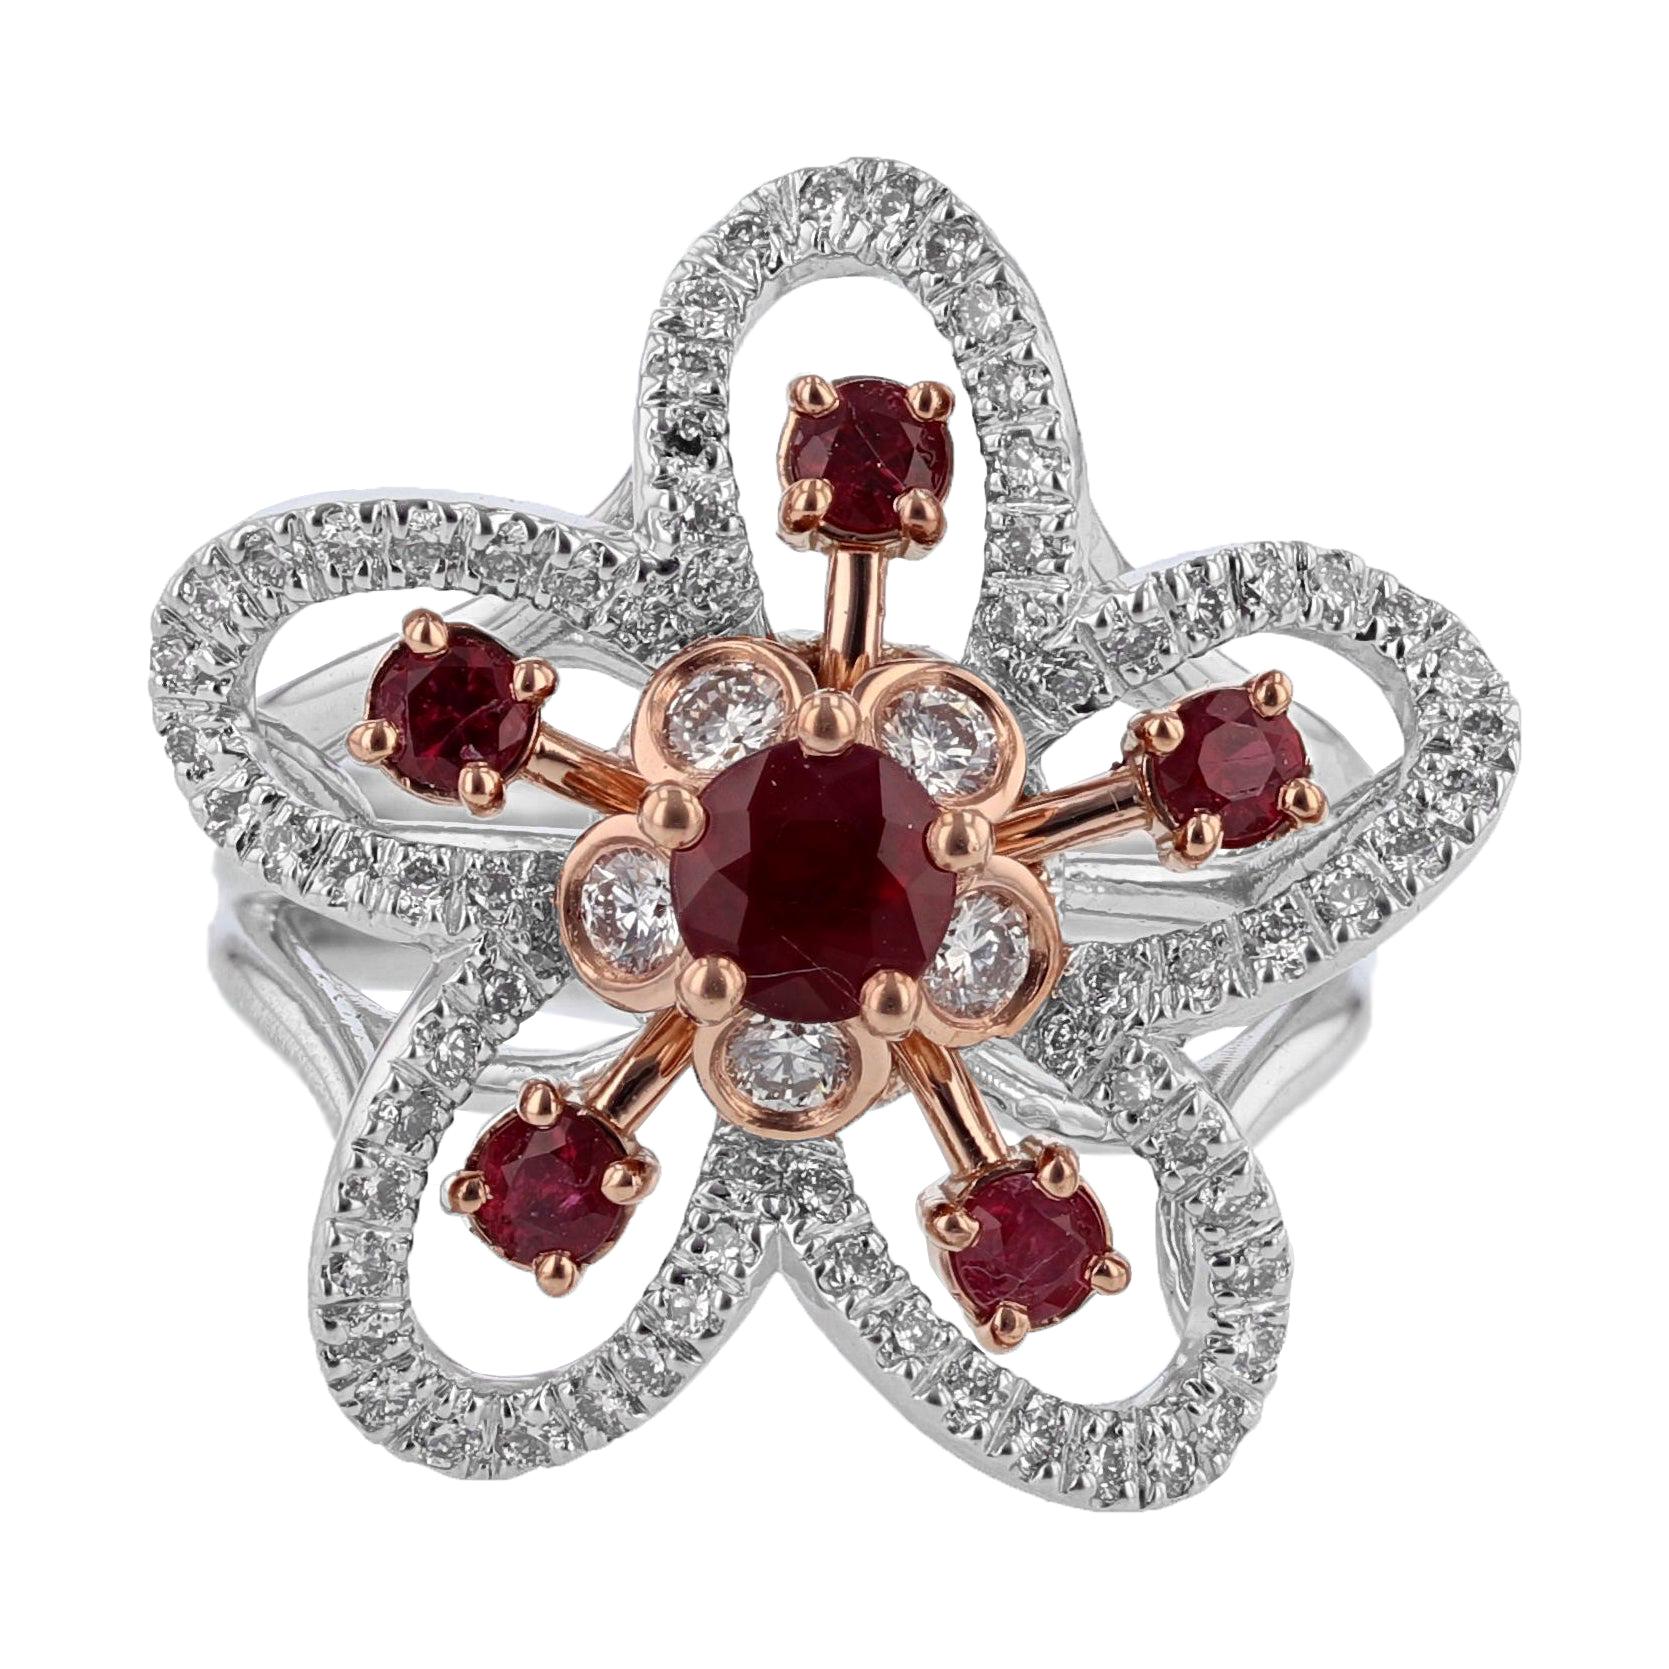 Nazarelle 14 Karat White and Rose Gold Ruby and Diamond Flower Ring